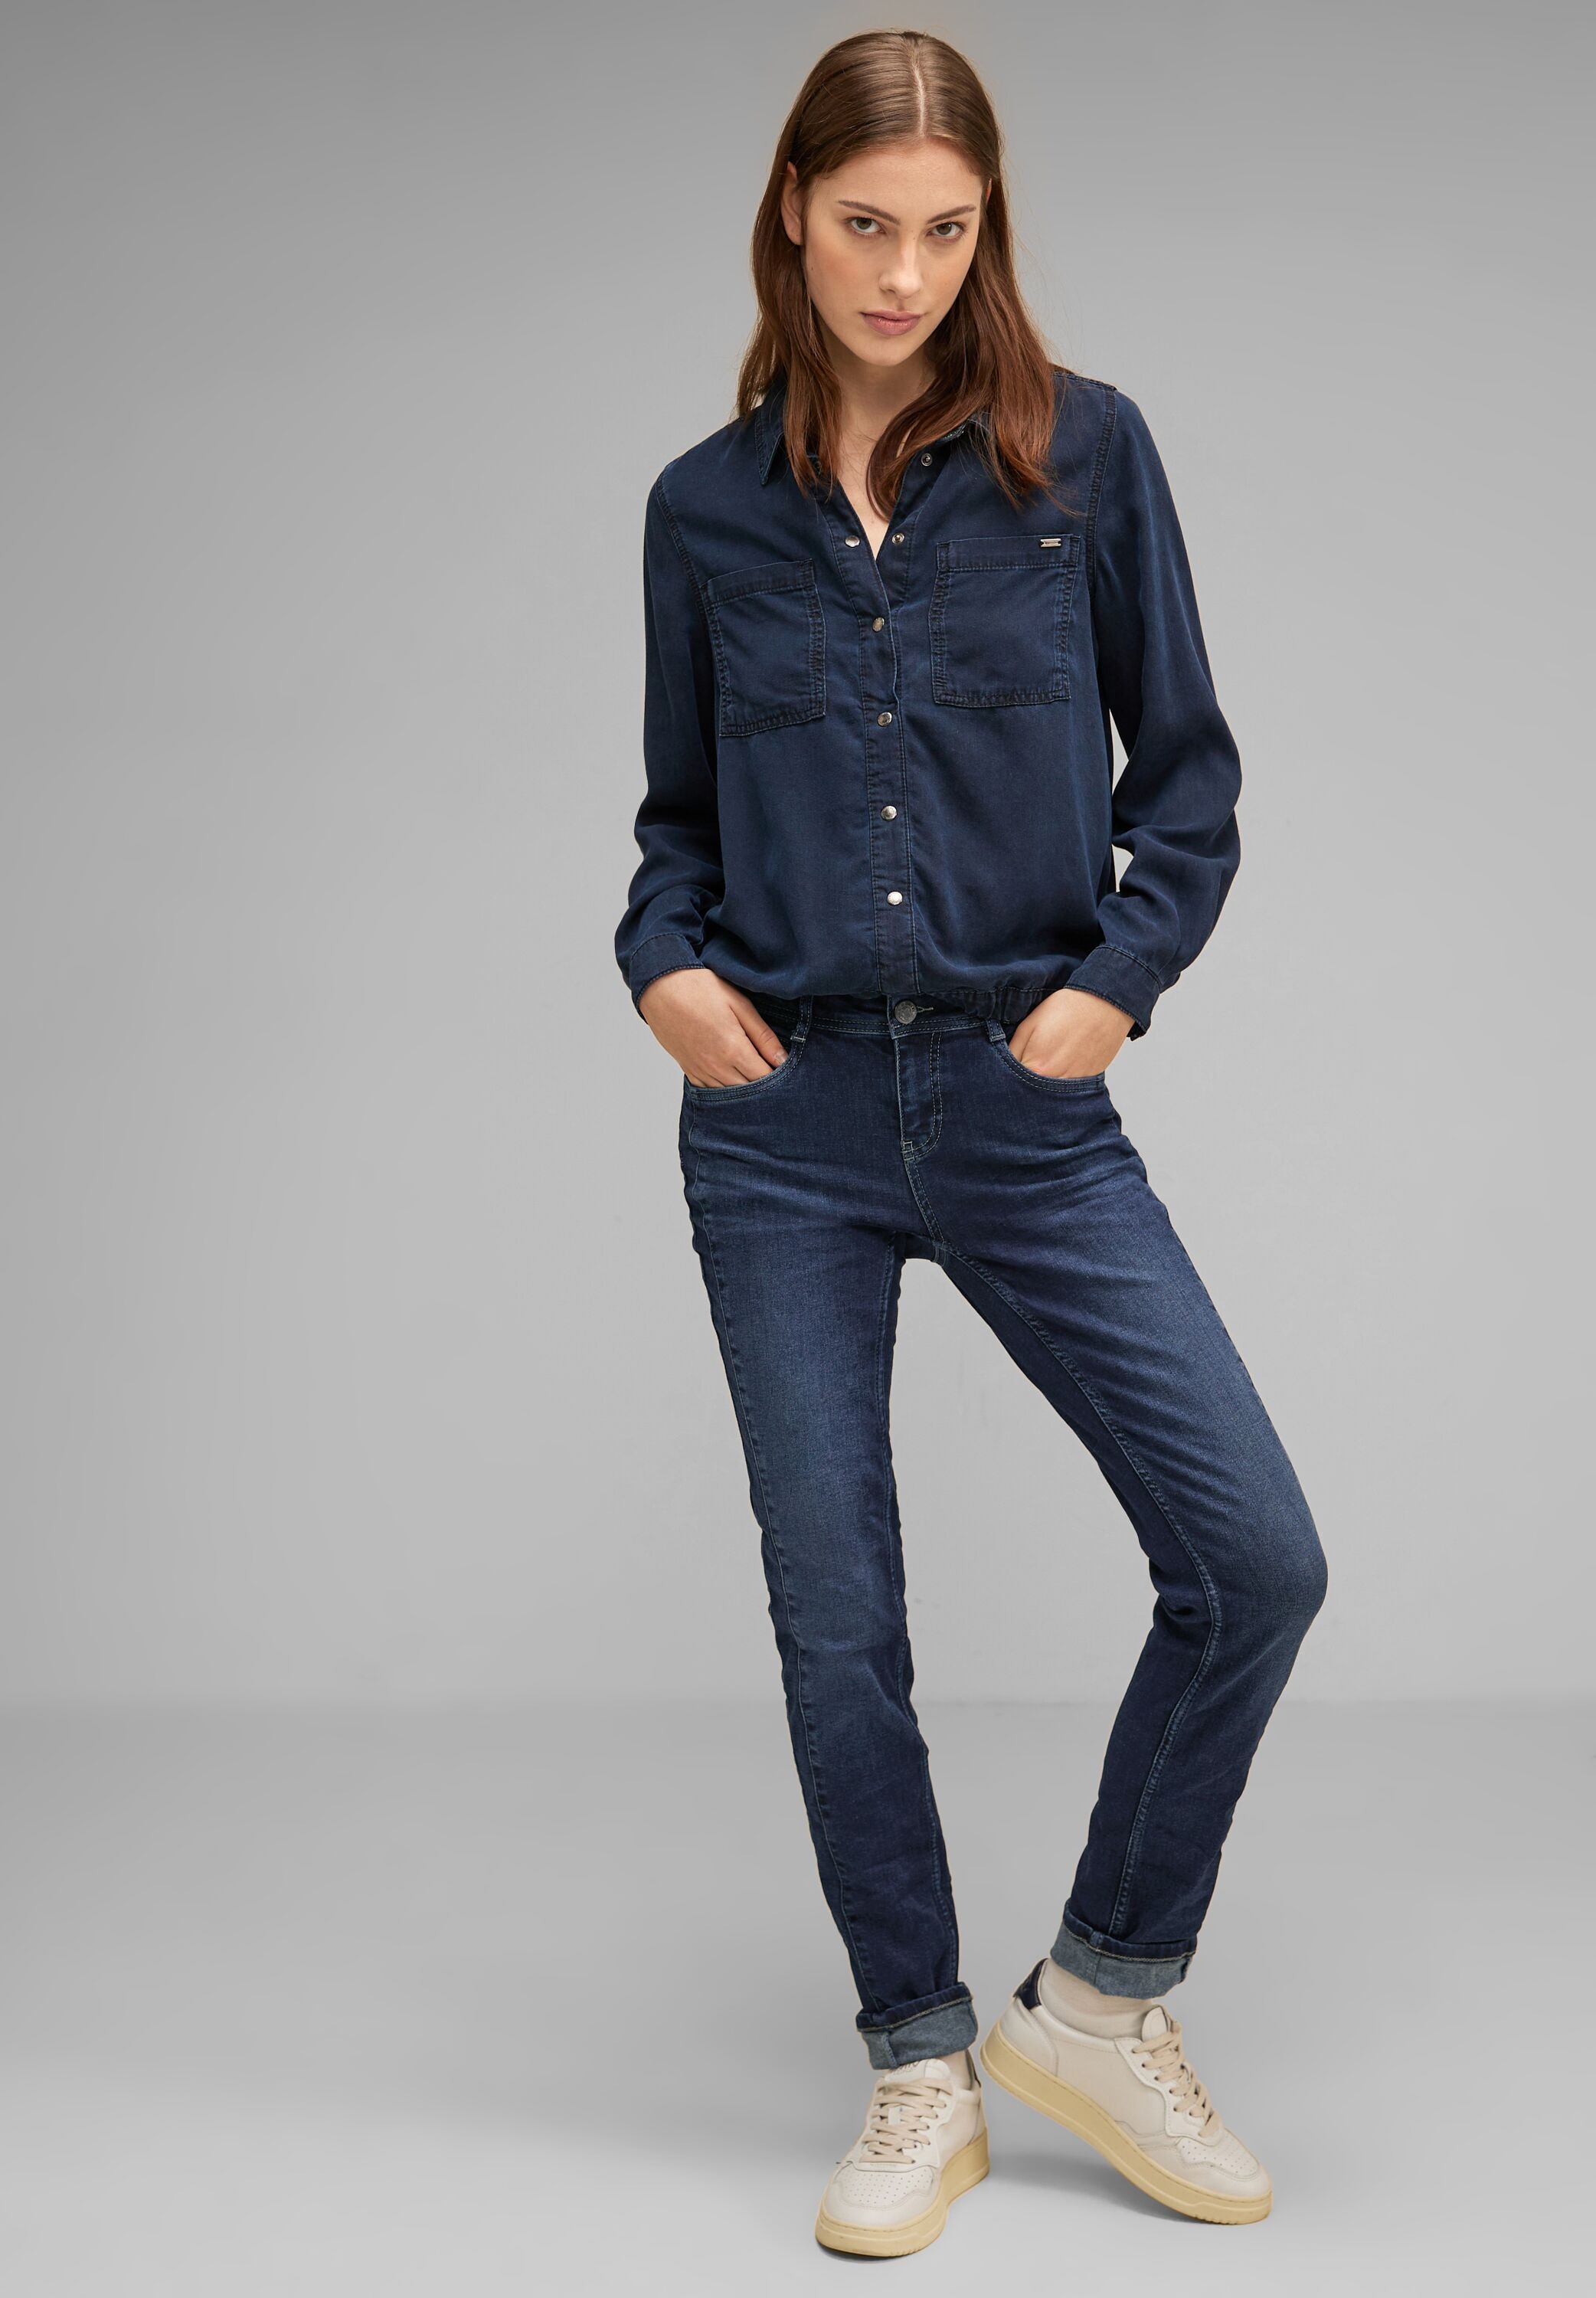 Thermojeans STREET Fit ONE »Casual Jane«, Thermo-Effekt Style bestellen Thermojeans Wärmender